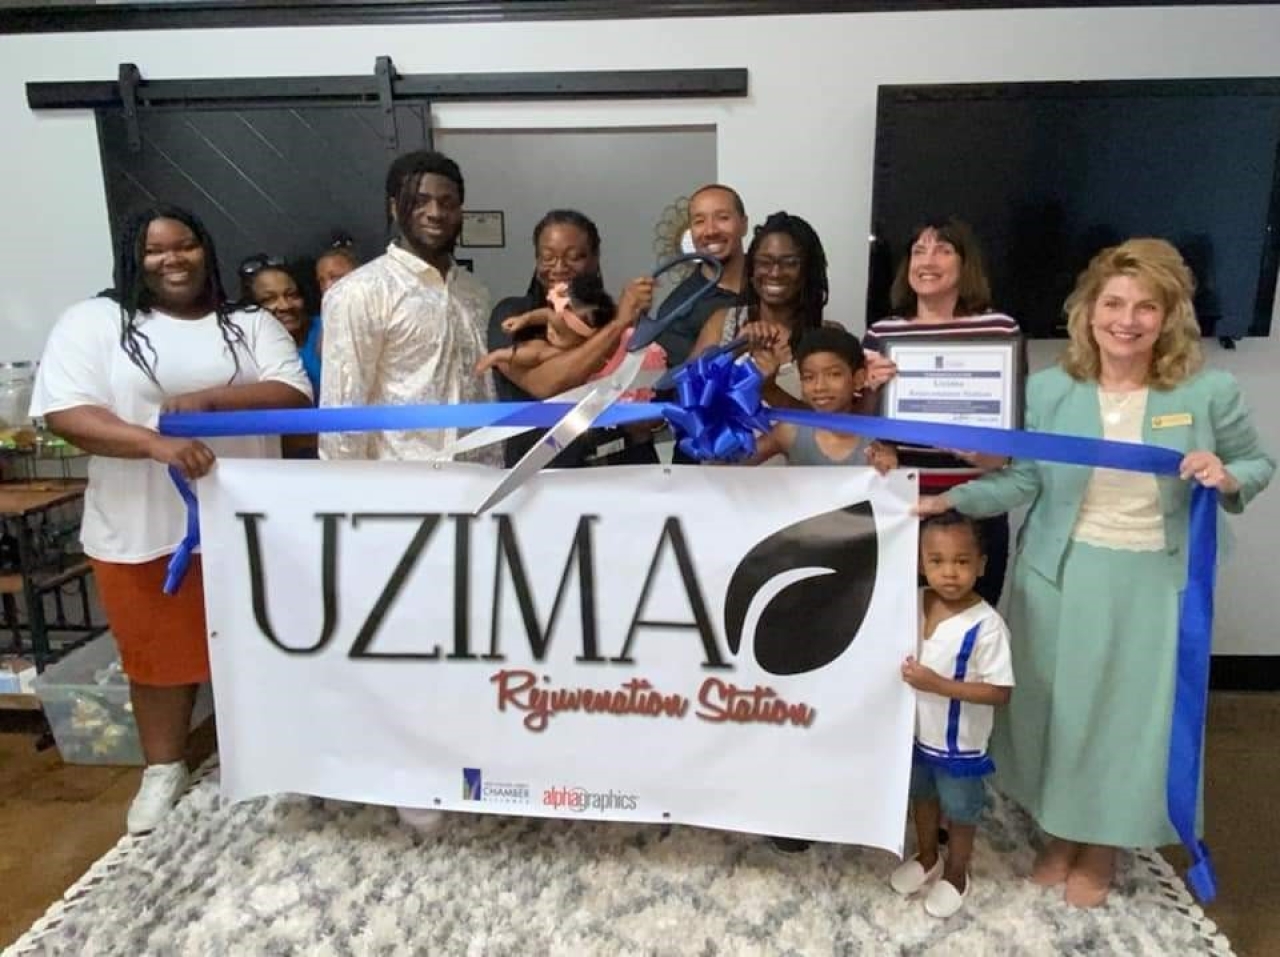 Rep. Gross believes in making Butler County as business friendly as possible, she's seen here supporting Uzima during the business's ribbon cutting ceremony.